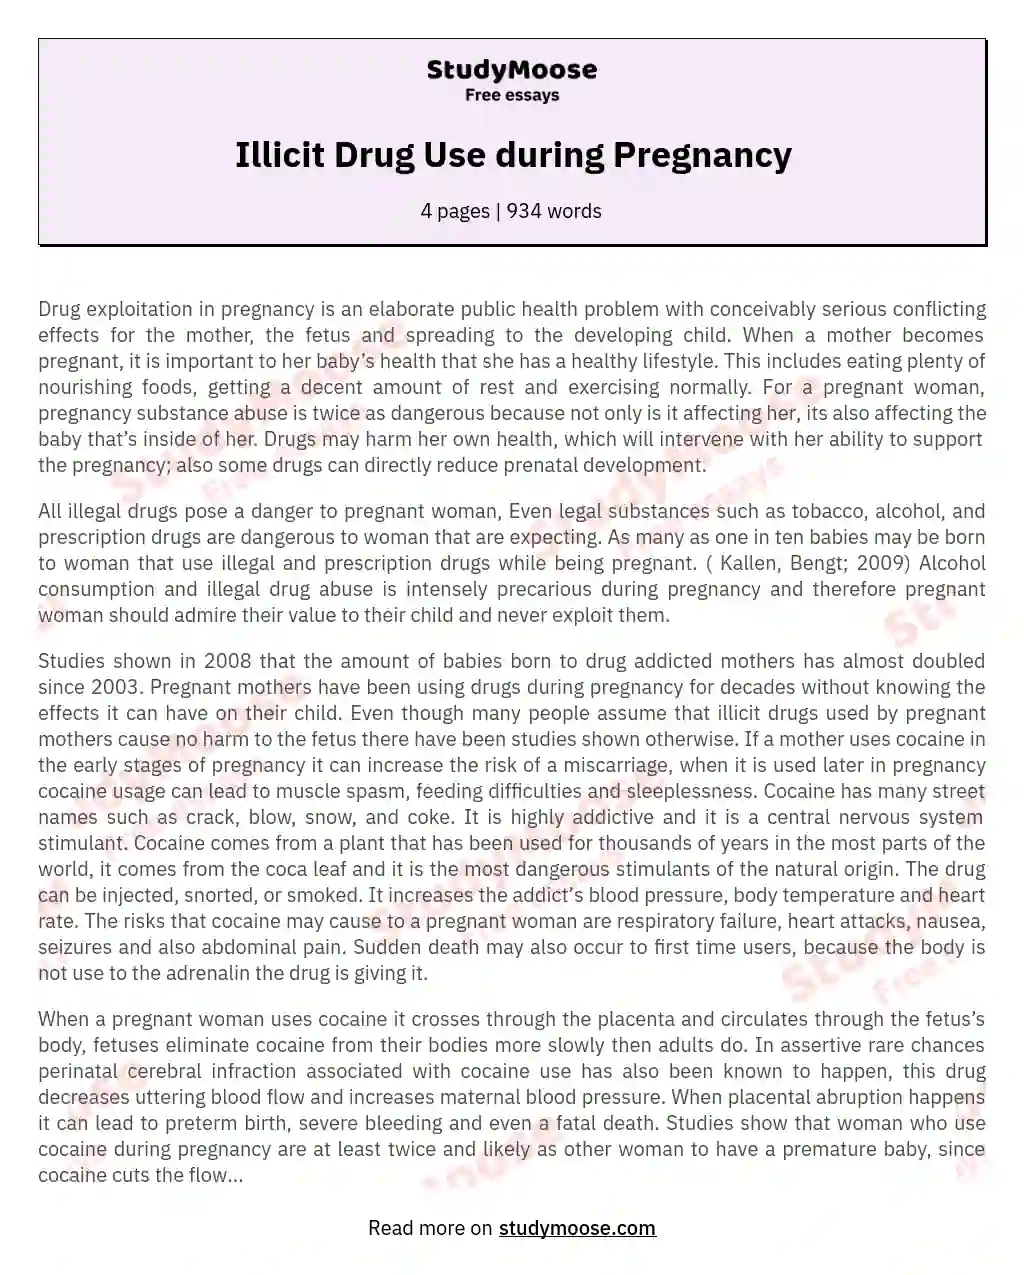 Pregnancy and Substance Abuse: Risks and Interventions essay